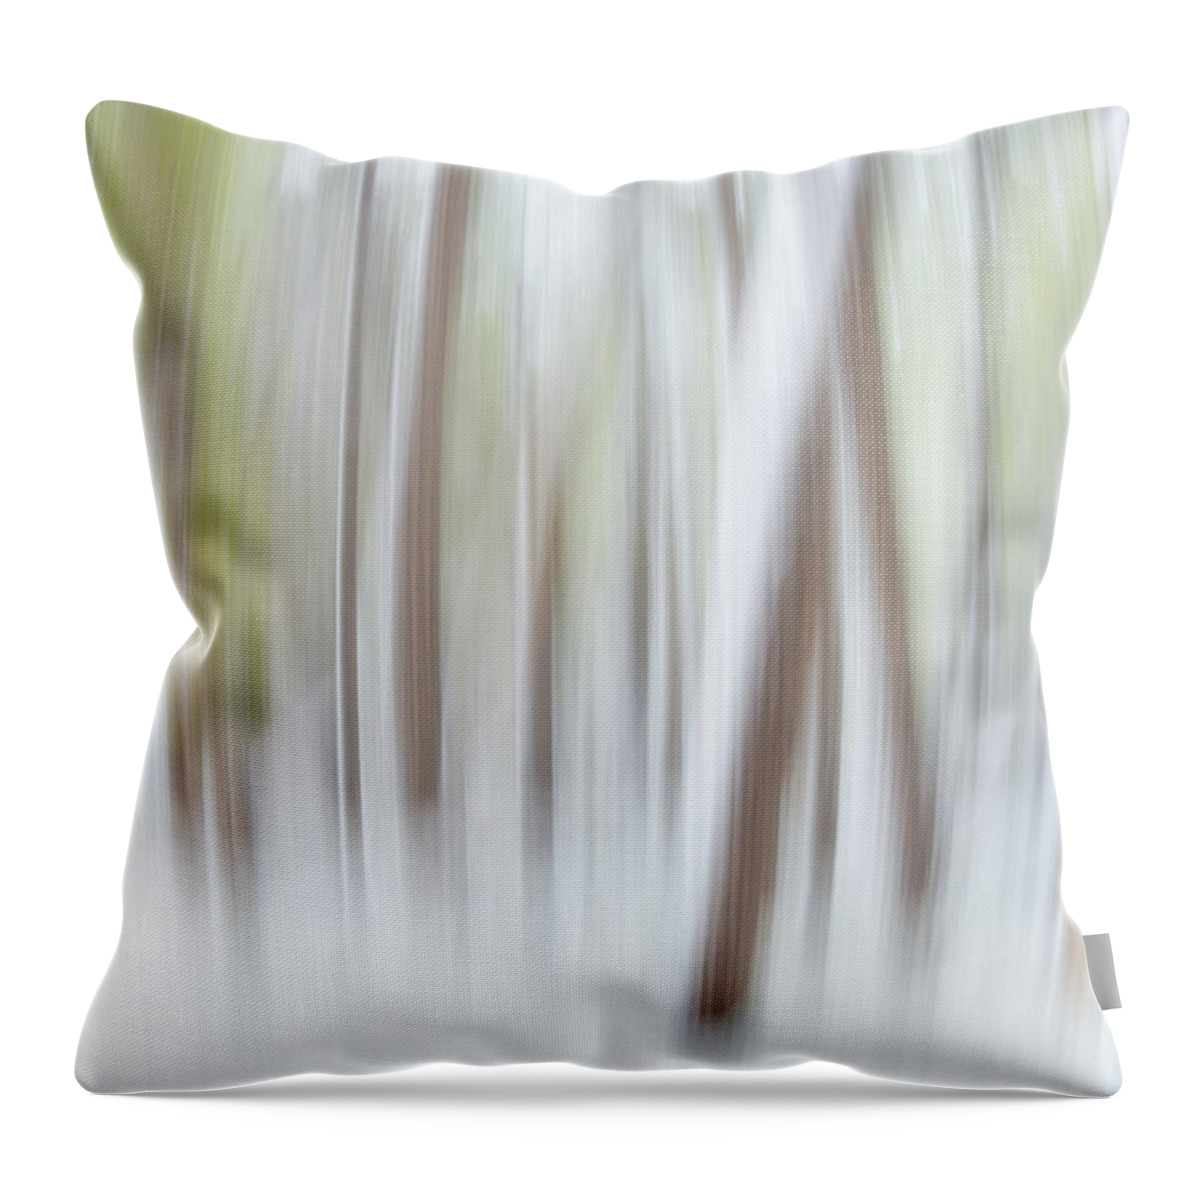 Motion Throw Pillow featuring the photograph Expanding Forest by Darren White